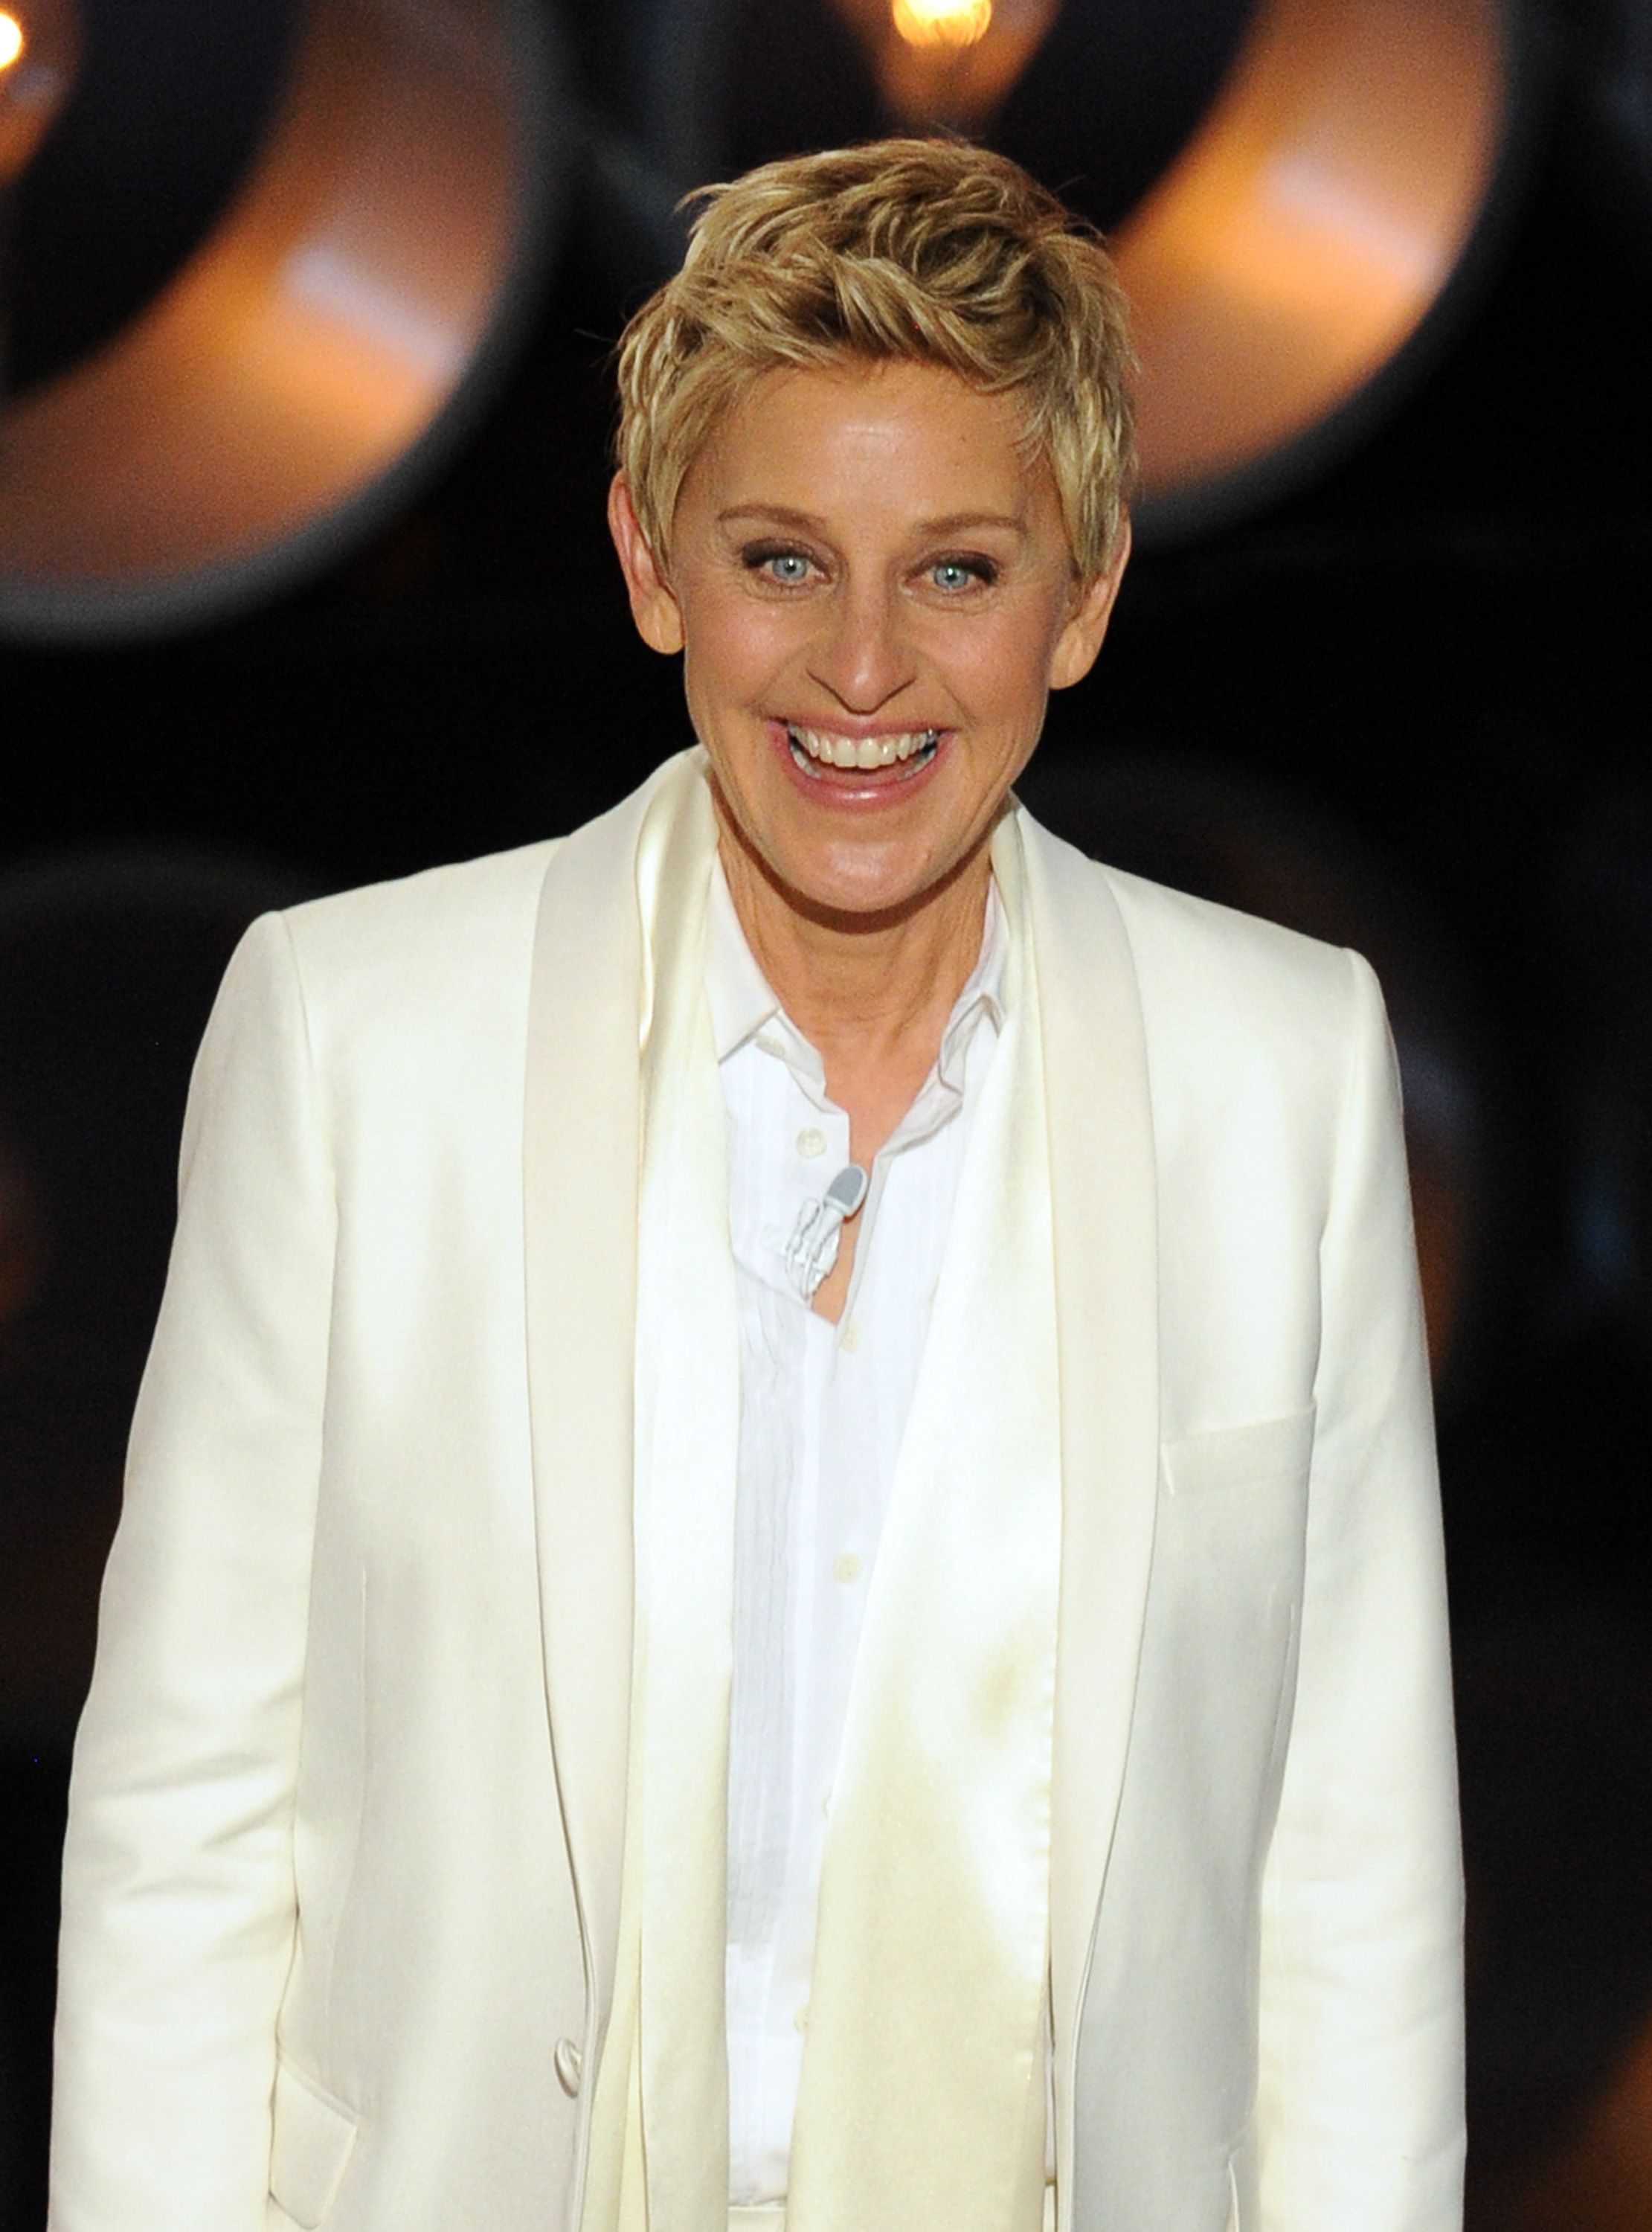 Ellen DeGeneres speaks onstage during the Oscars at the Dolby Theatre on March 2, 2014 in Hollywood, California. | Photo: Getty Images